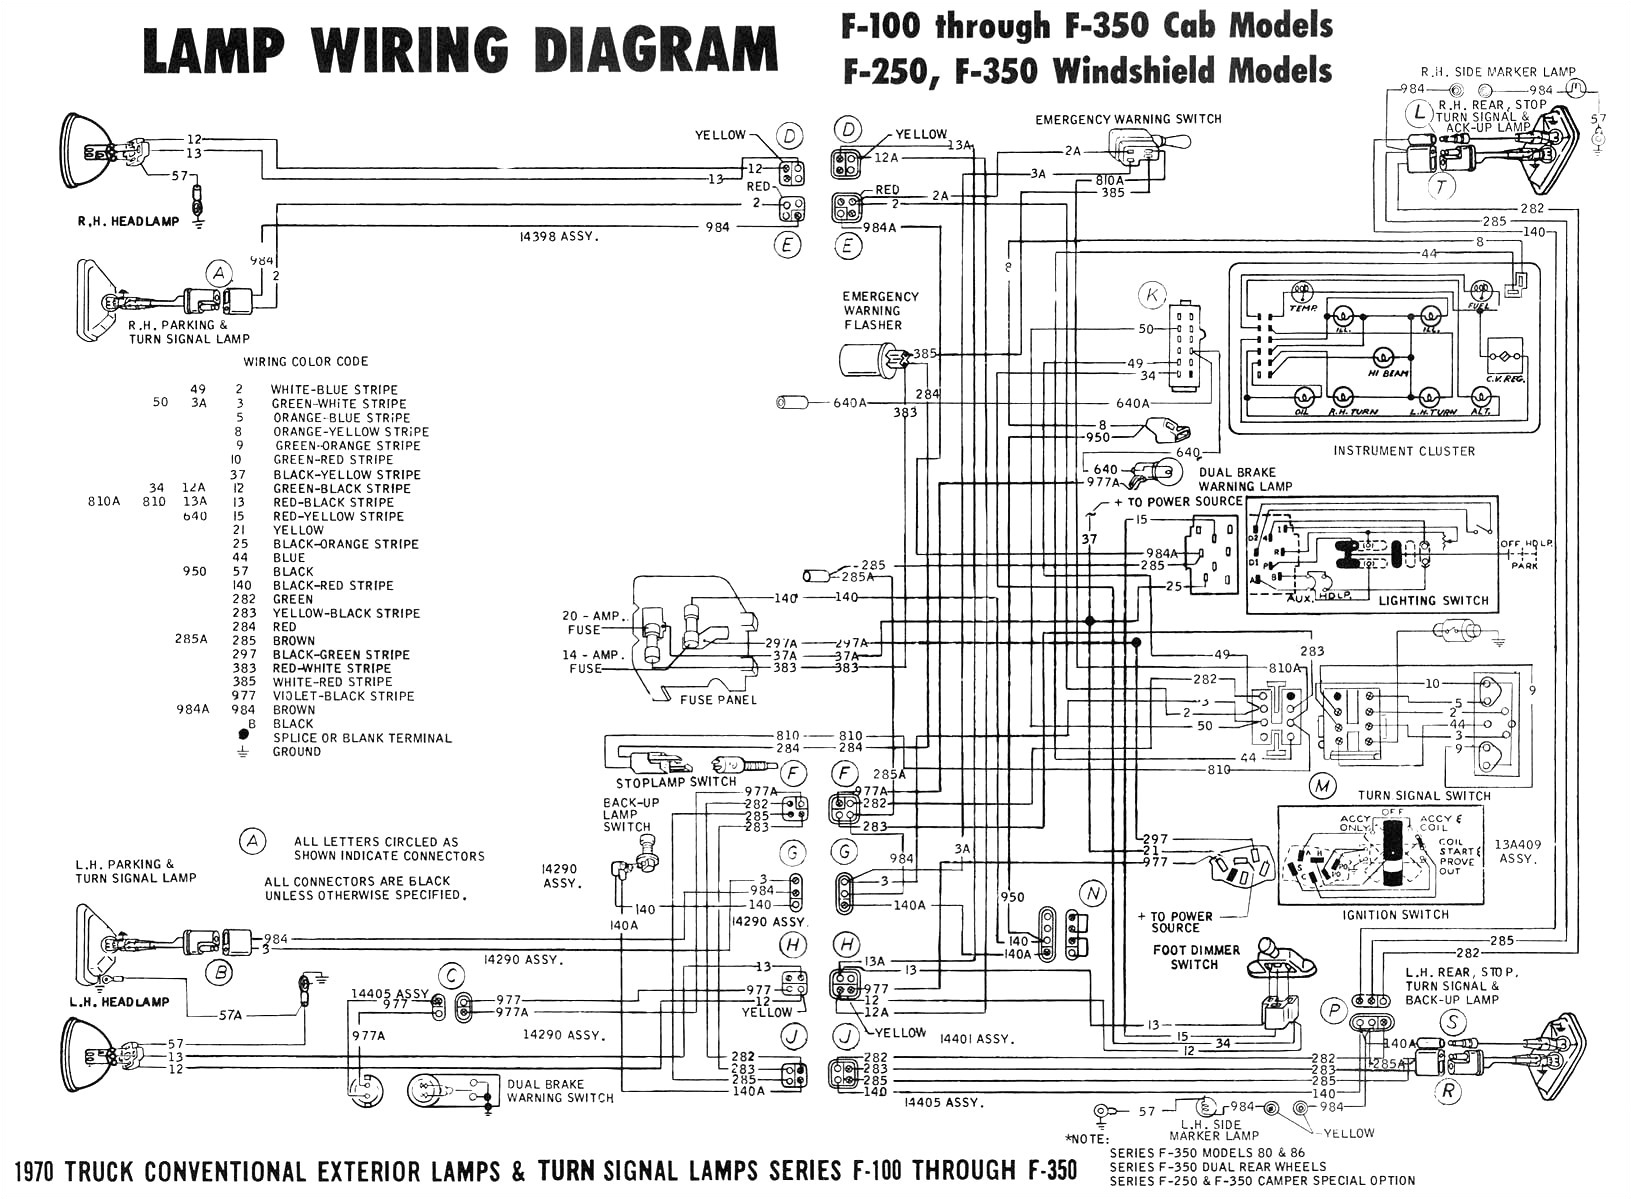 1997 ford truck wiring diagram wiring diagram preview wiring diagrams free besides 1997 ford f 150 instrument cluster wiring